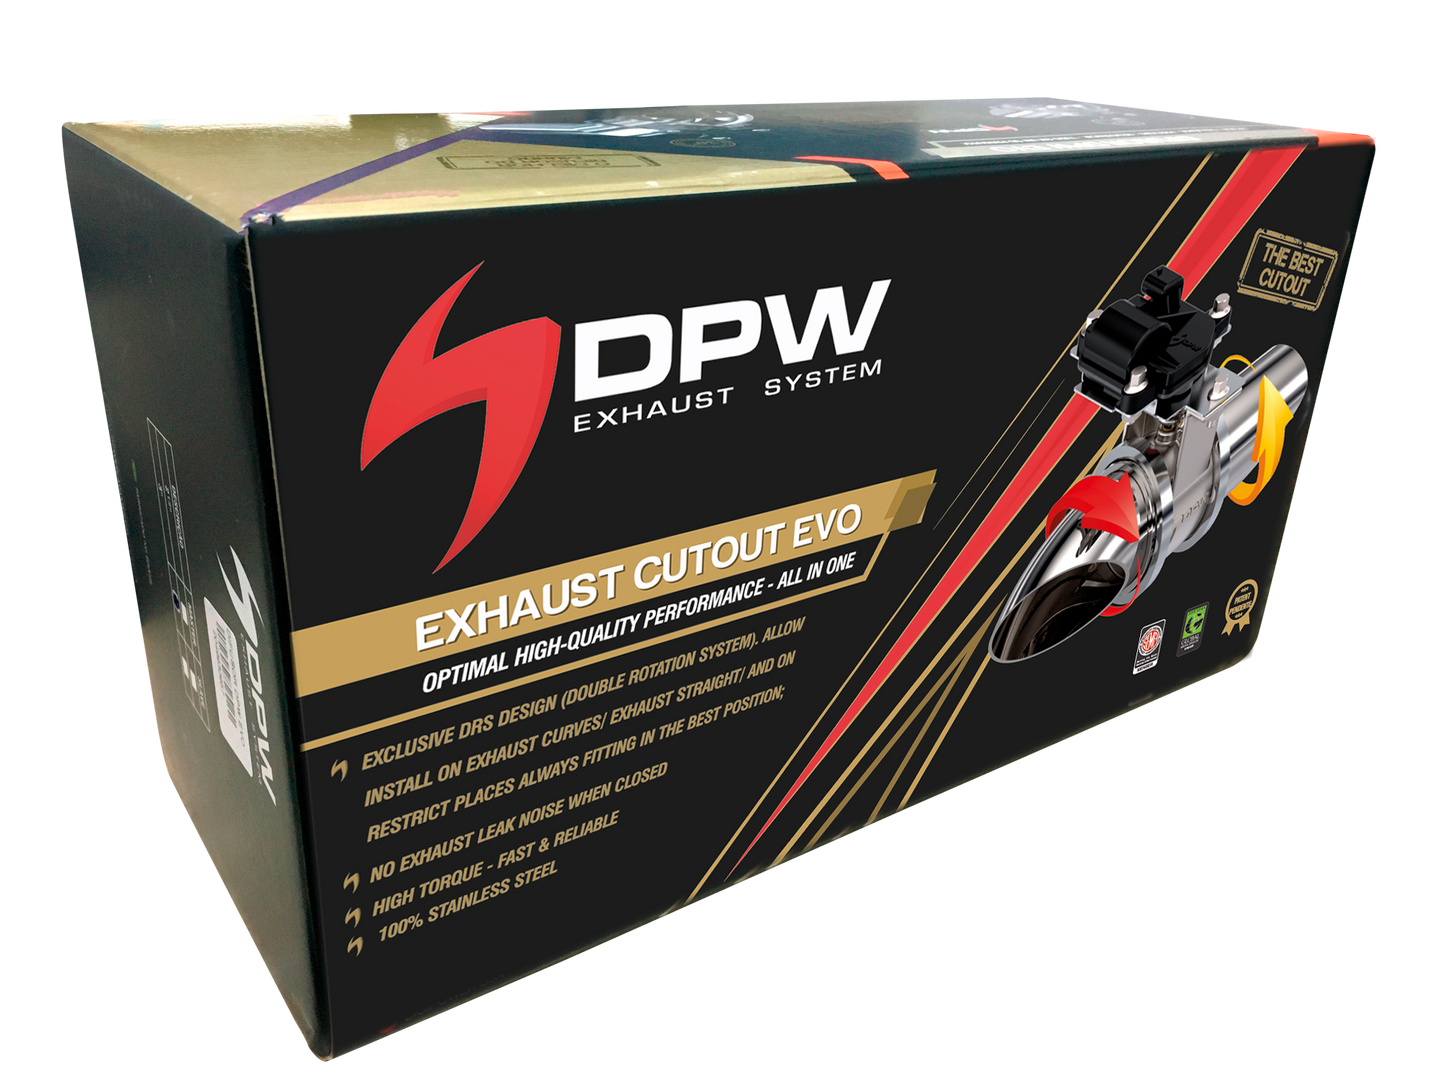 DPW Exhaust Cutout EVO Kit for Single Exhaust 2.5"